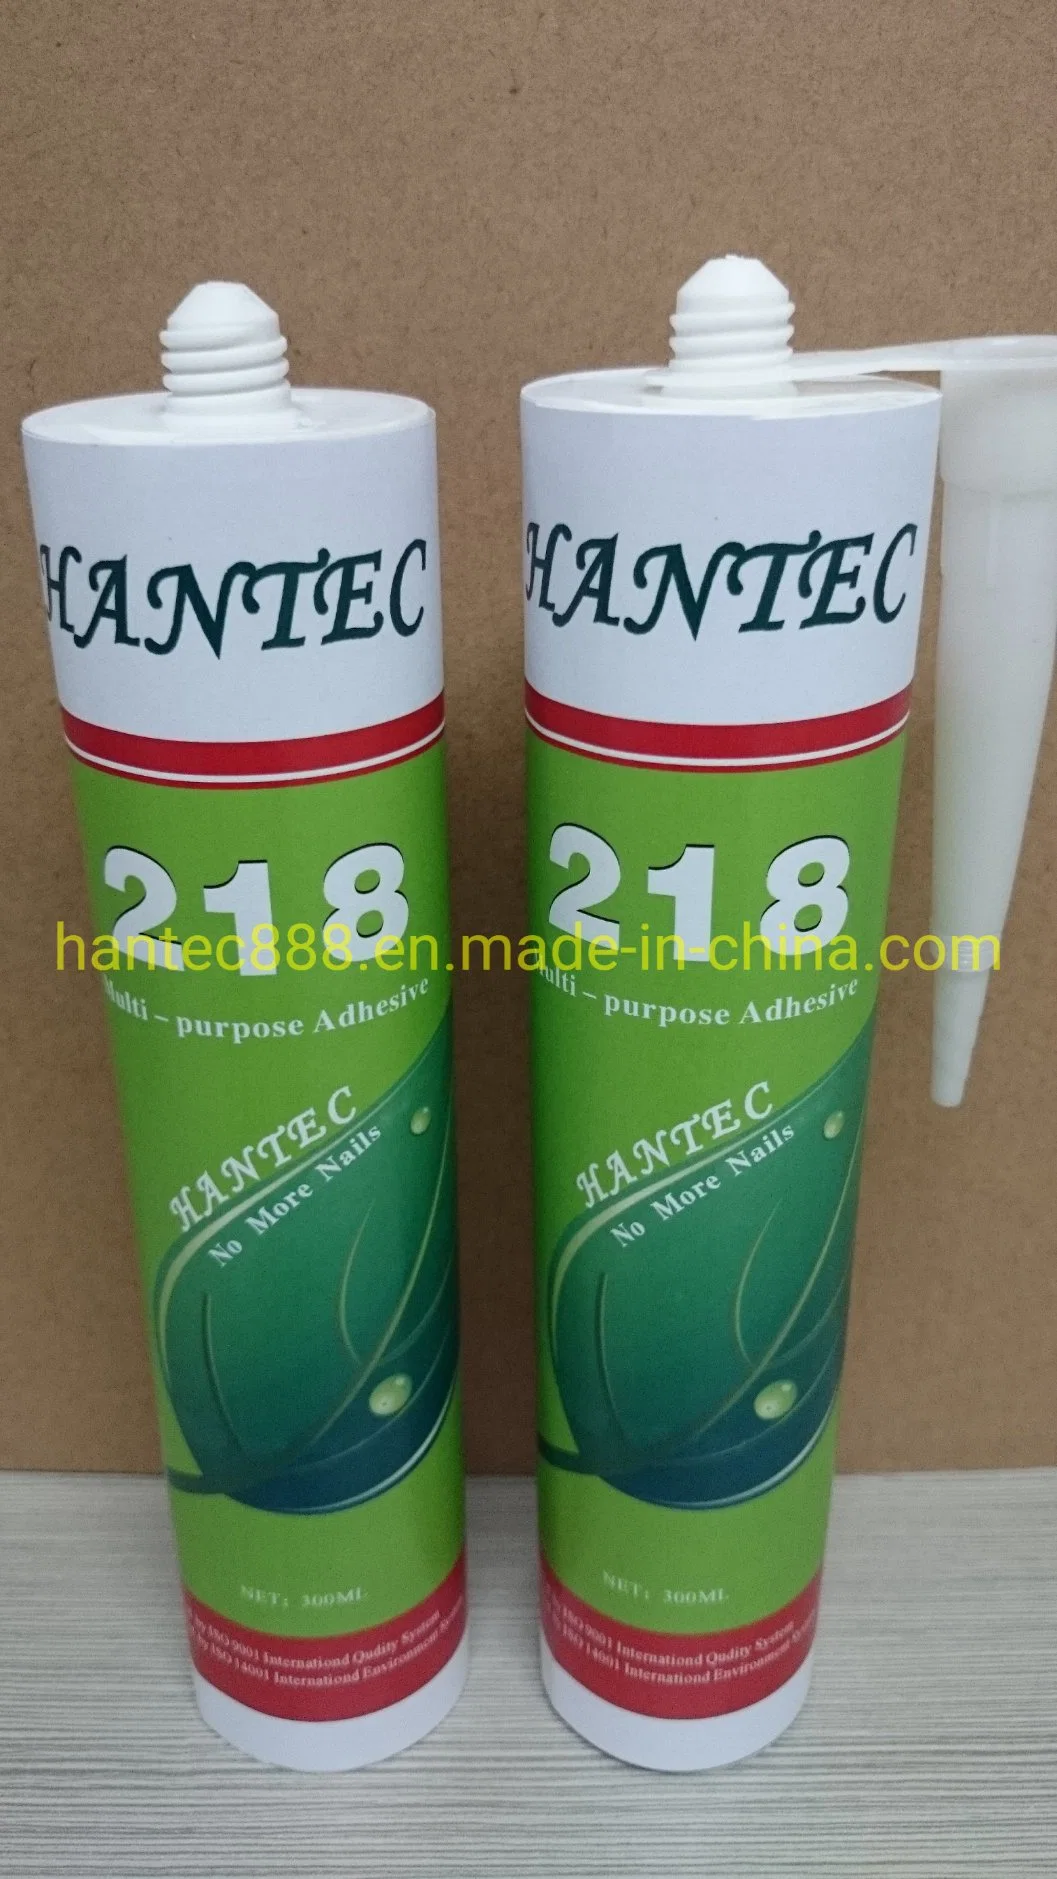 Nail Free White Glue/Soft Smell, Non-Toxic Modified Polymer Sealant Mount Adhesive/Kitchen and Bathroom Decoration Material